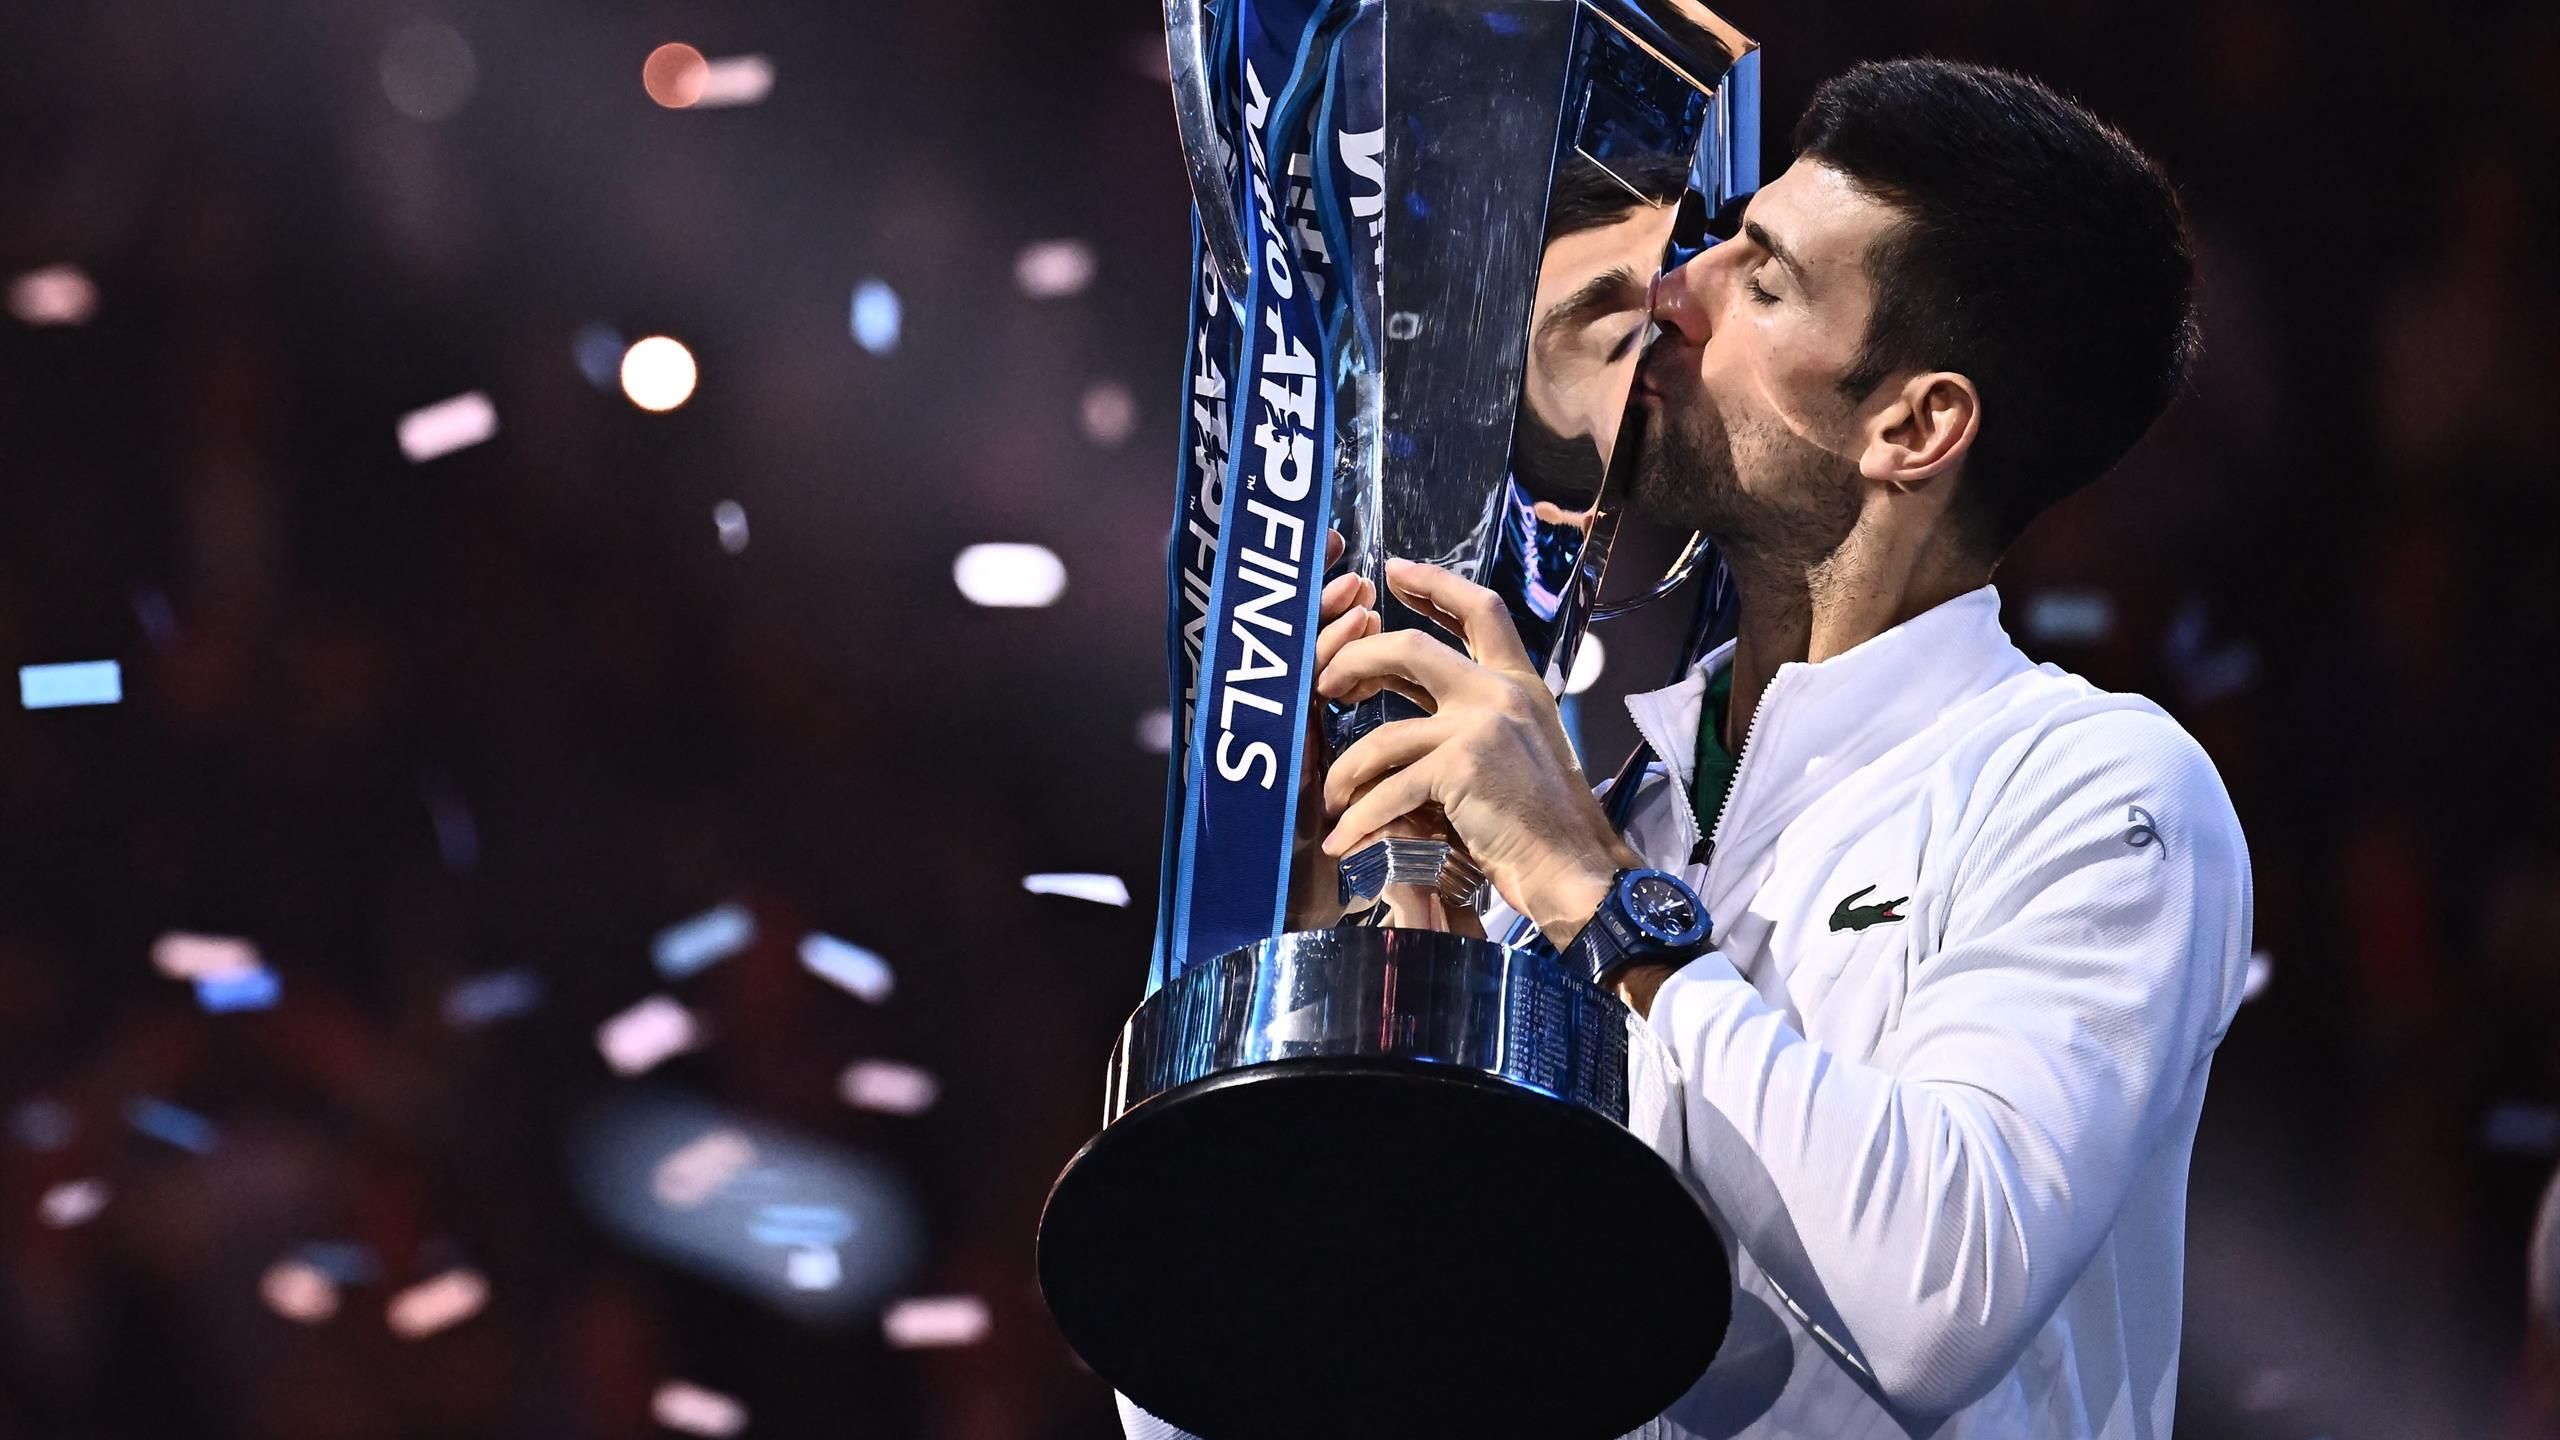 Exclusive Novak Djokovic says ATP Finals win is even bigger given how badly year began